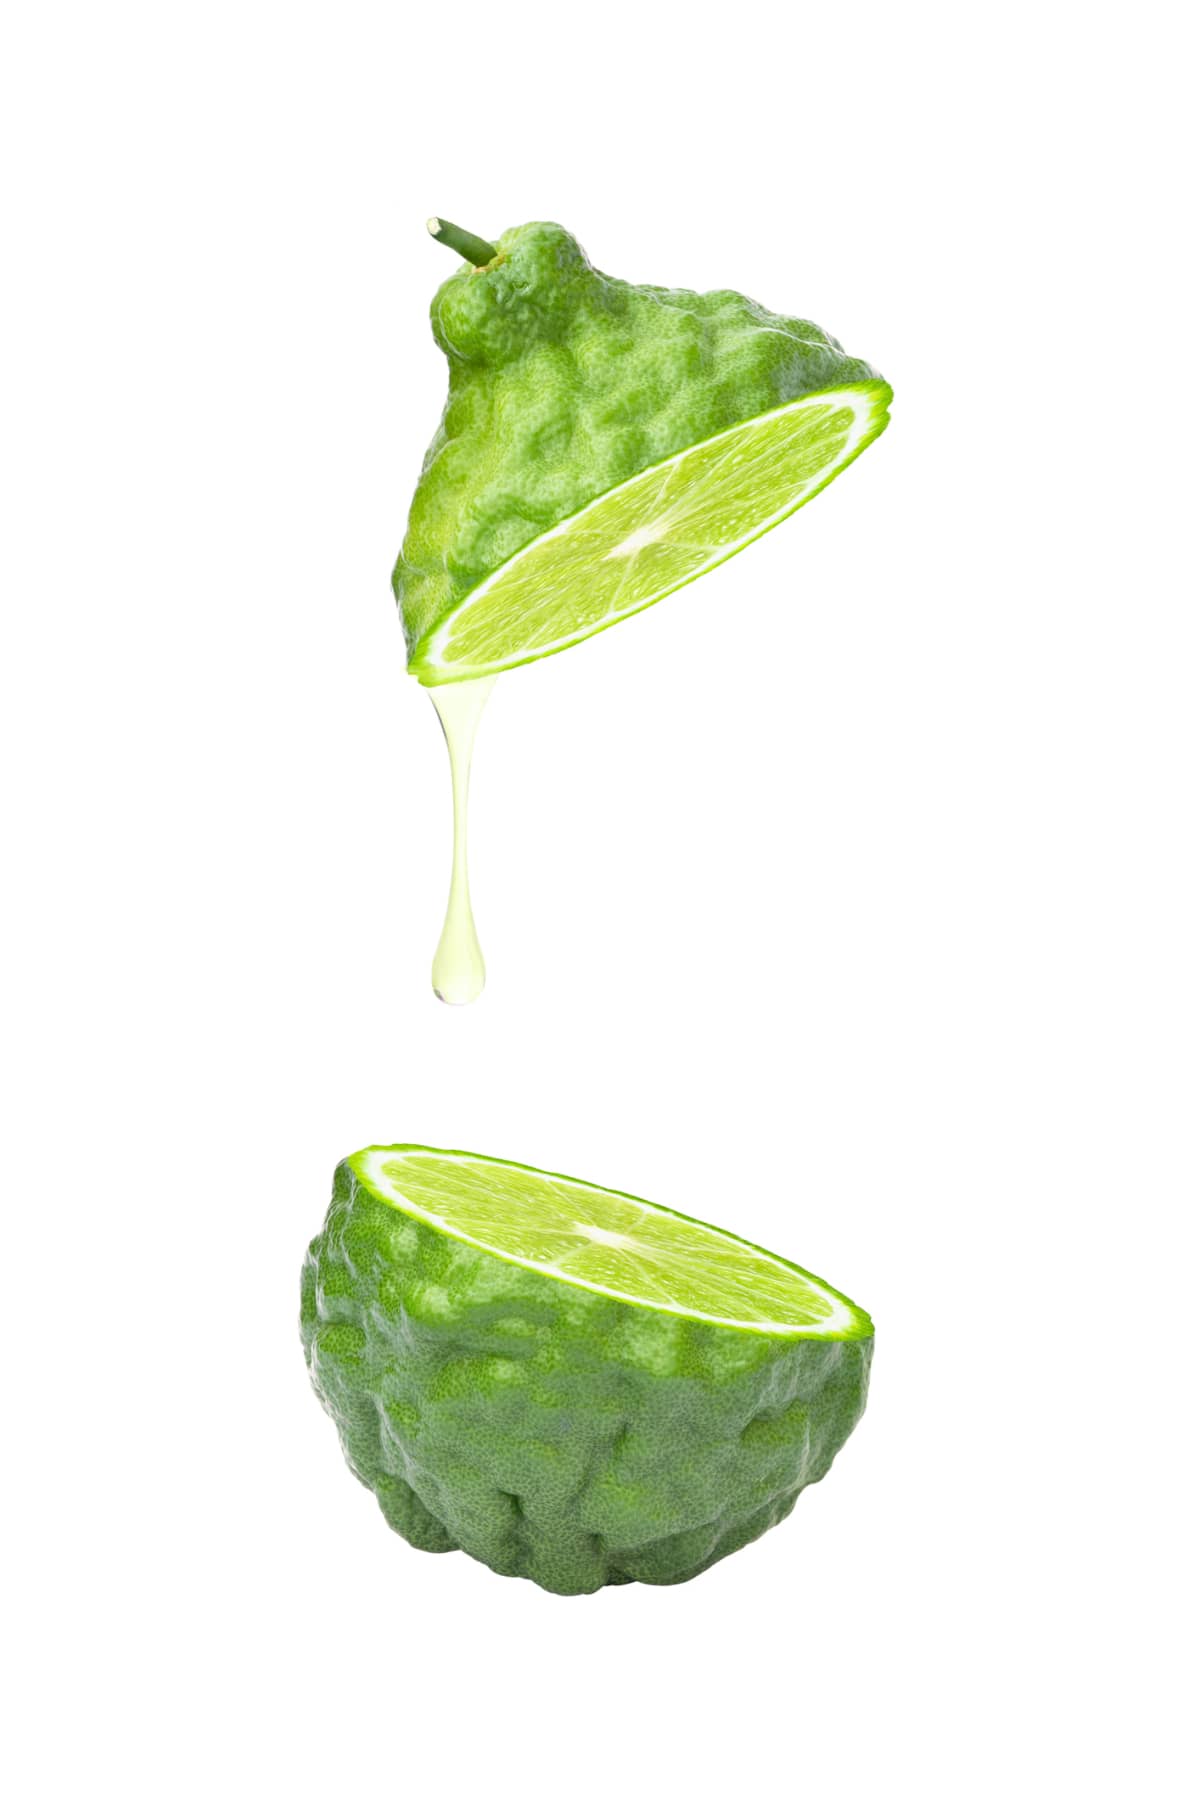 Bergamot essential oil extract drop dripping isolated on white background.